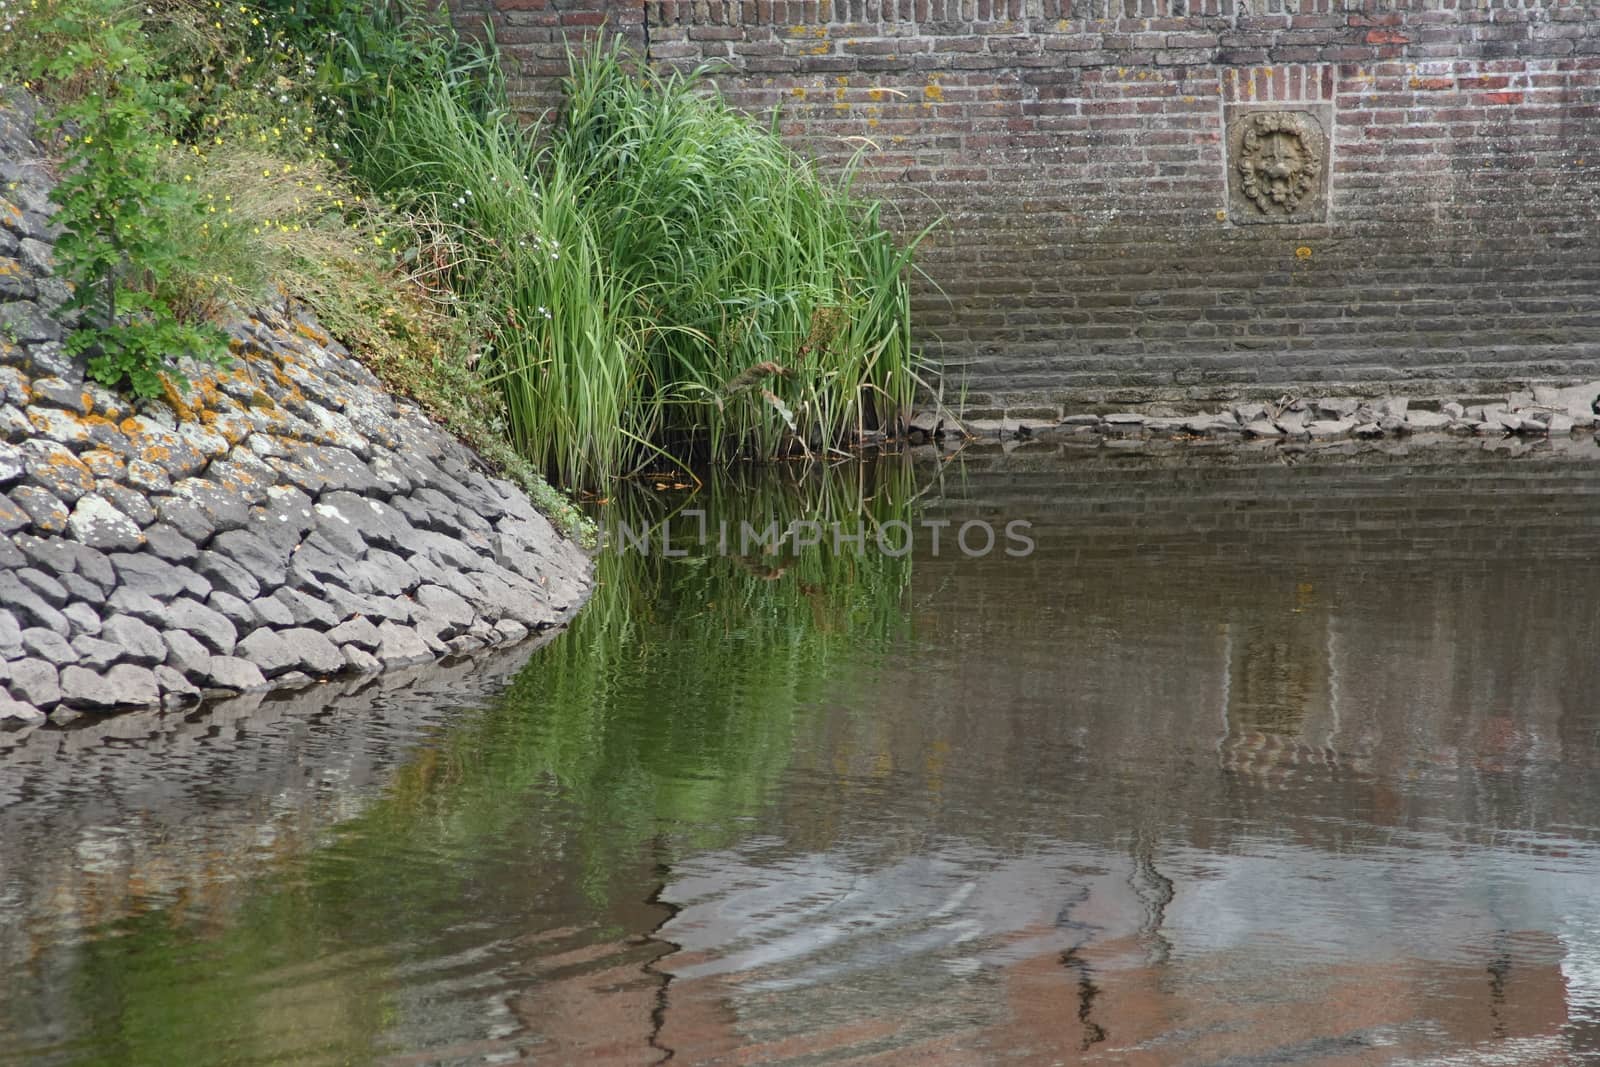 Fortified dam with large stones and reed beds